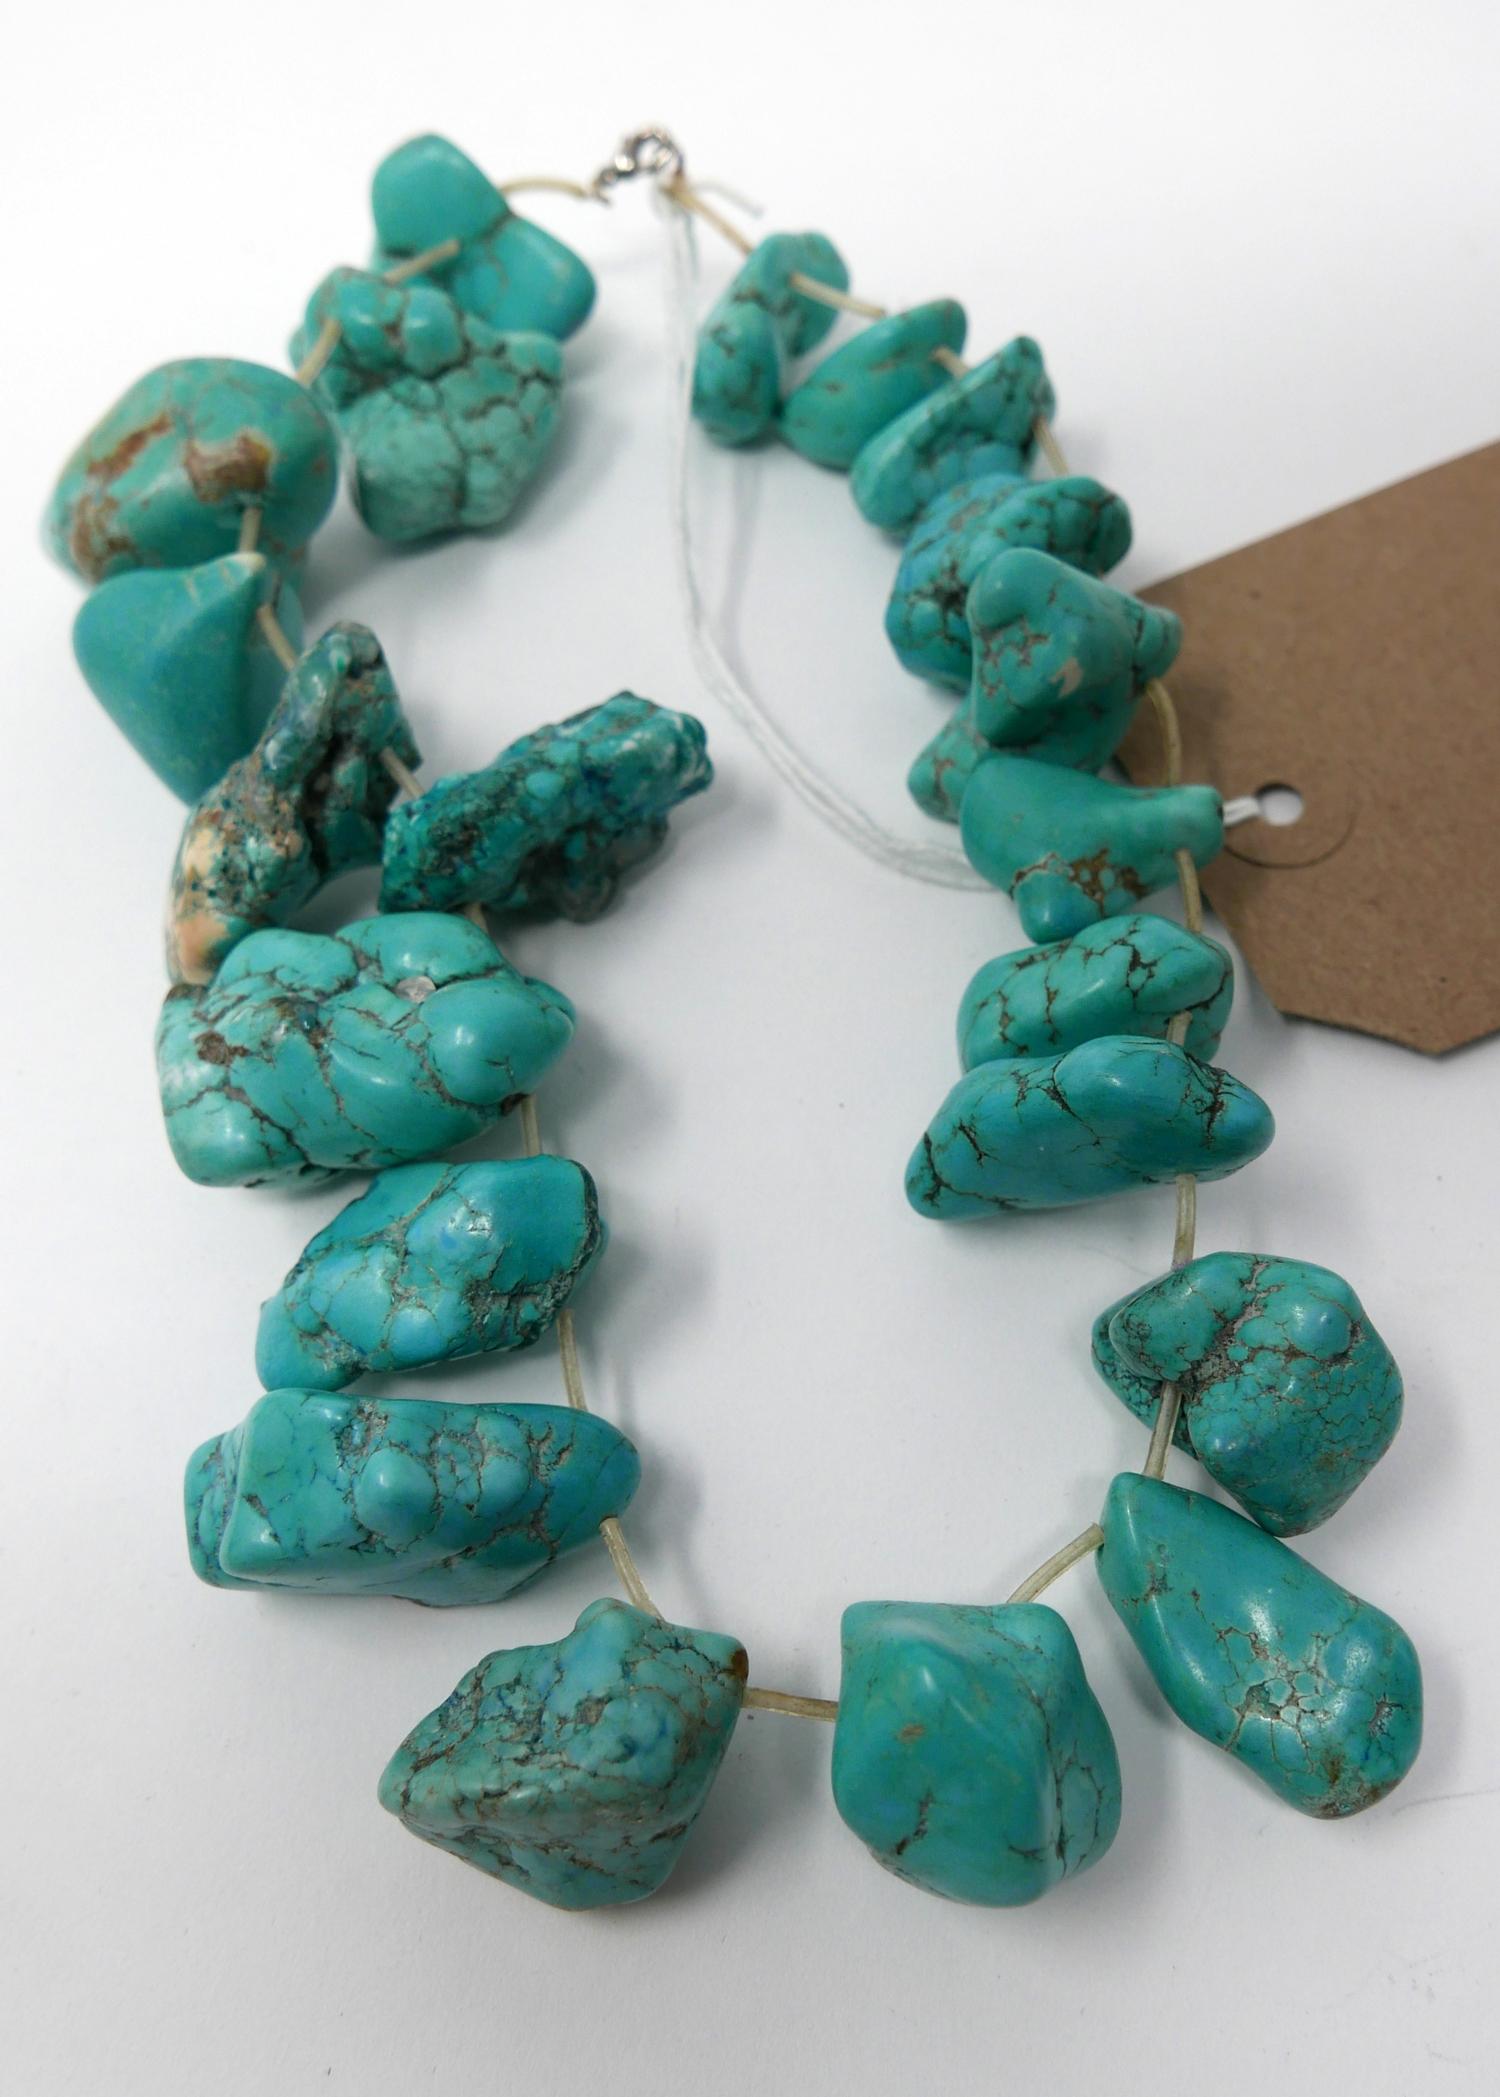 A vintage chunky turquoise necklace composed of 21 large natural turquoise beads, L: 40cm, 320g - Image 2 of 2